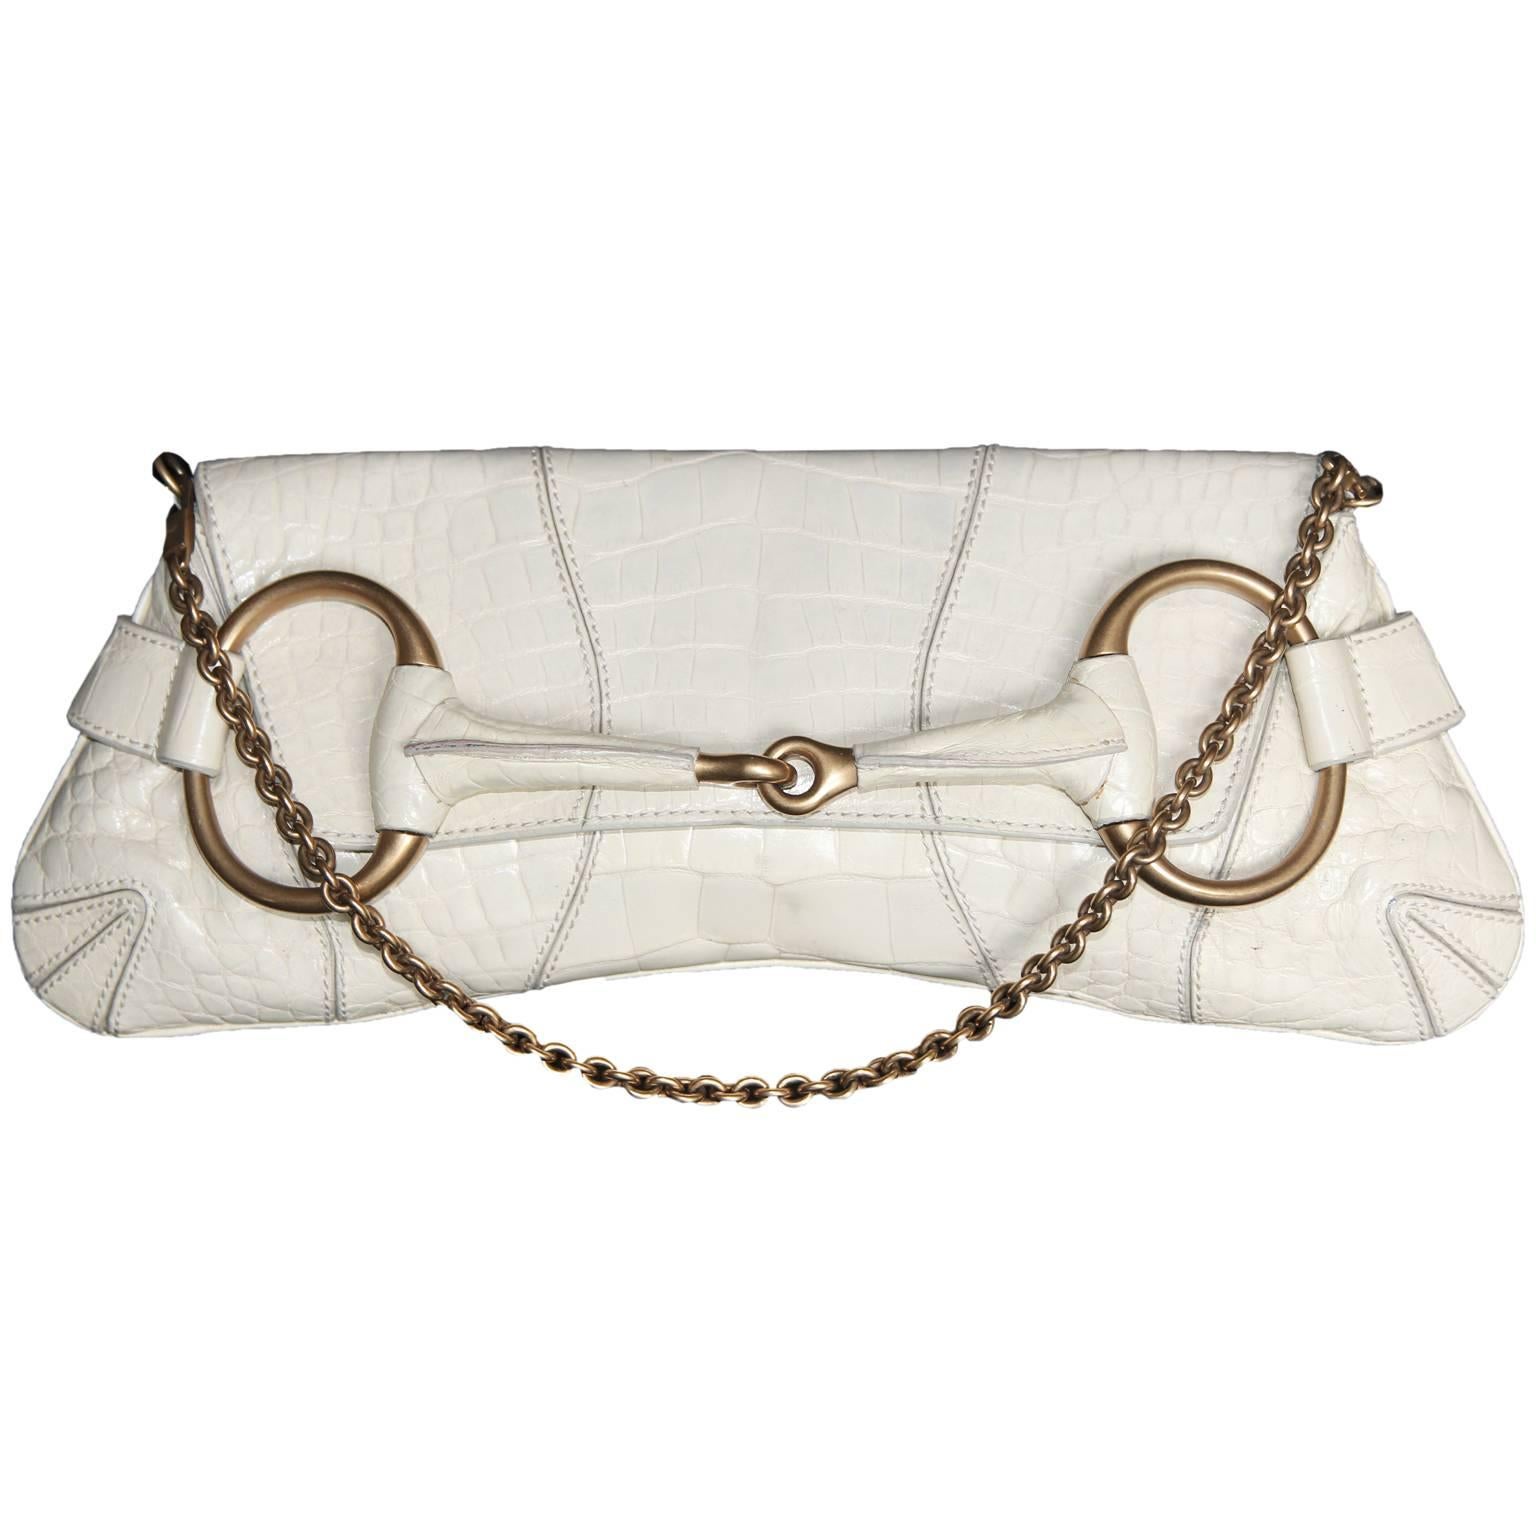 That Ridiculously Chic Tom Ford Gucci FW 2003 White Croc Leather Horsebit Bag! For Sale